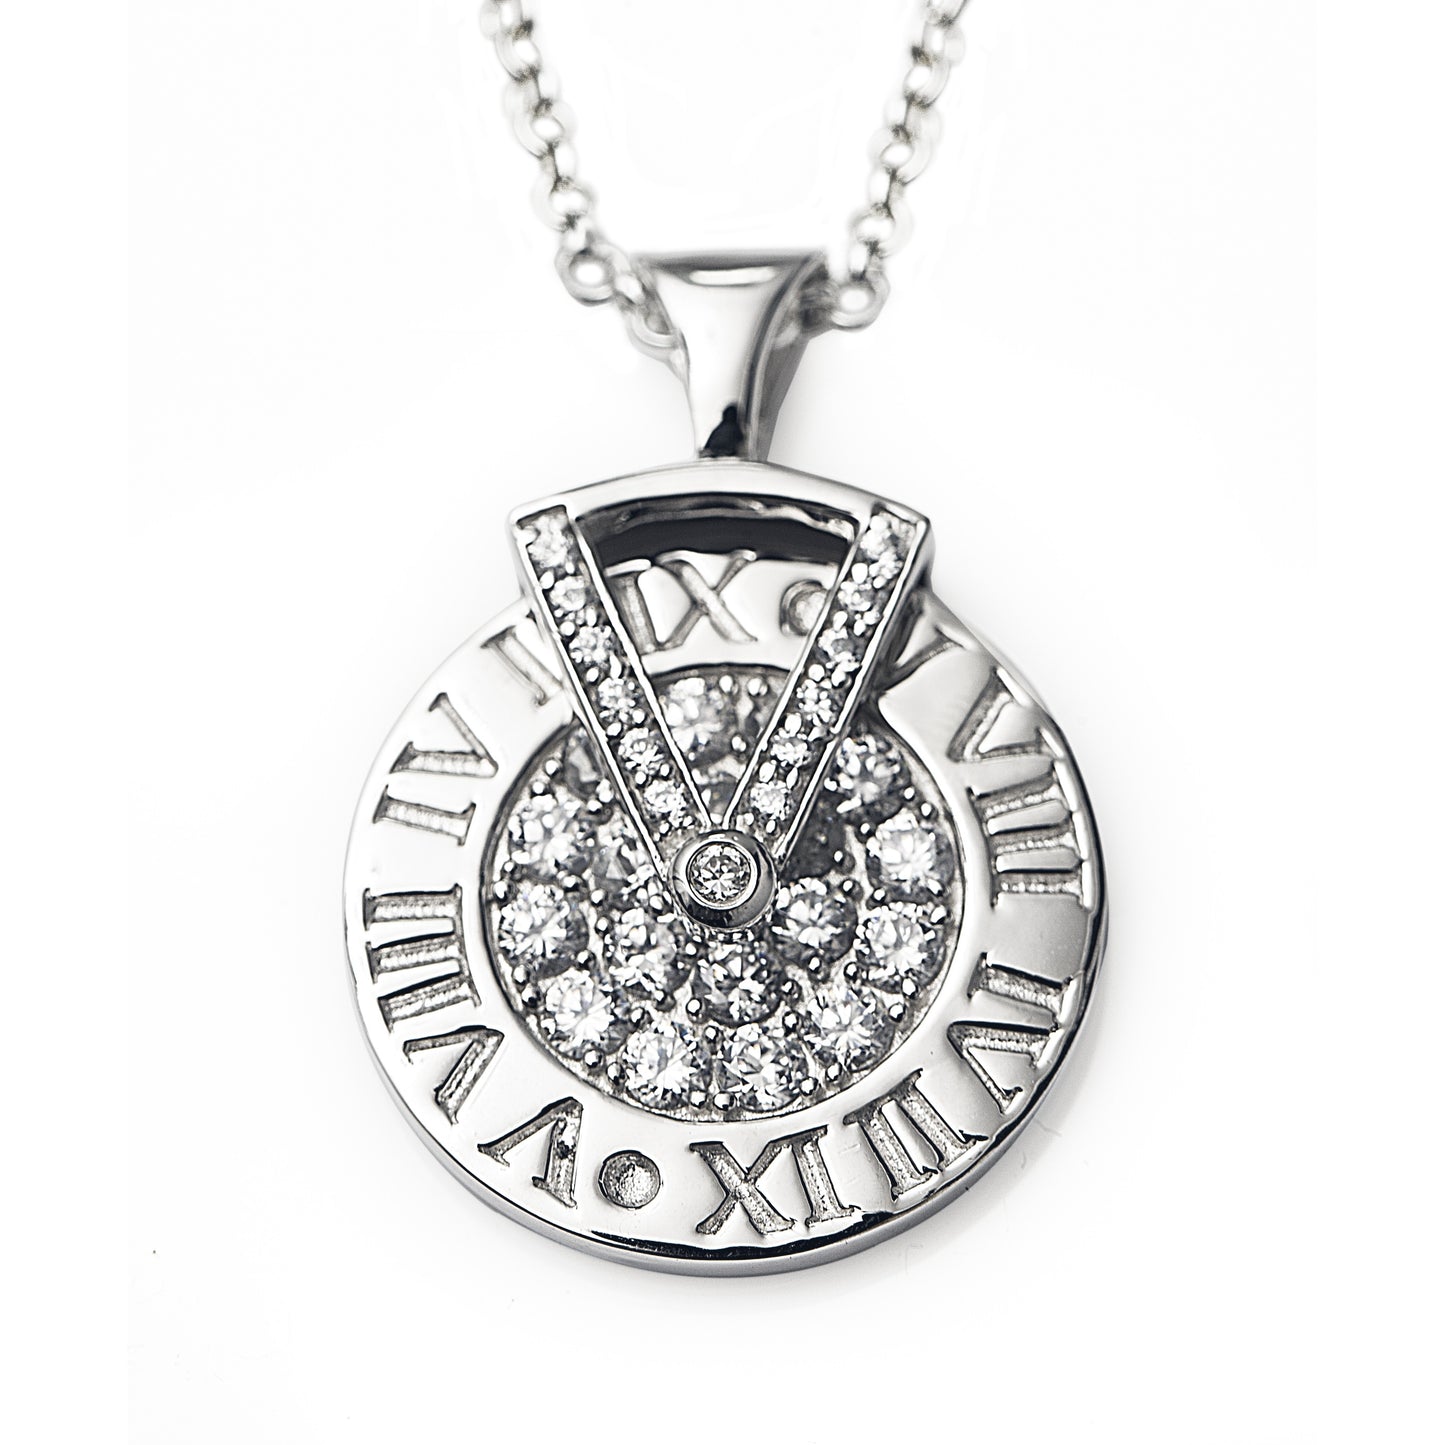 Roman Sundial Necklace in 925 sterling silver with a moving a sundial. The necklace is embedded with cubic zirconia stones surrounded by our signature Roman Numerals. Worldwide Shipping. Affordable luxury jewellery by Bellagio & Co.